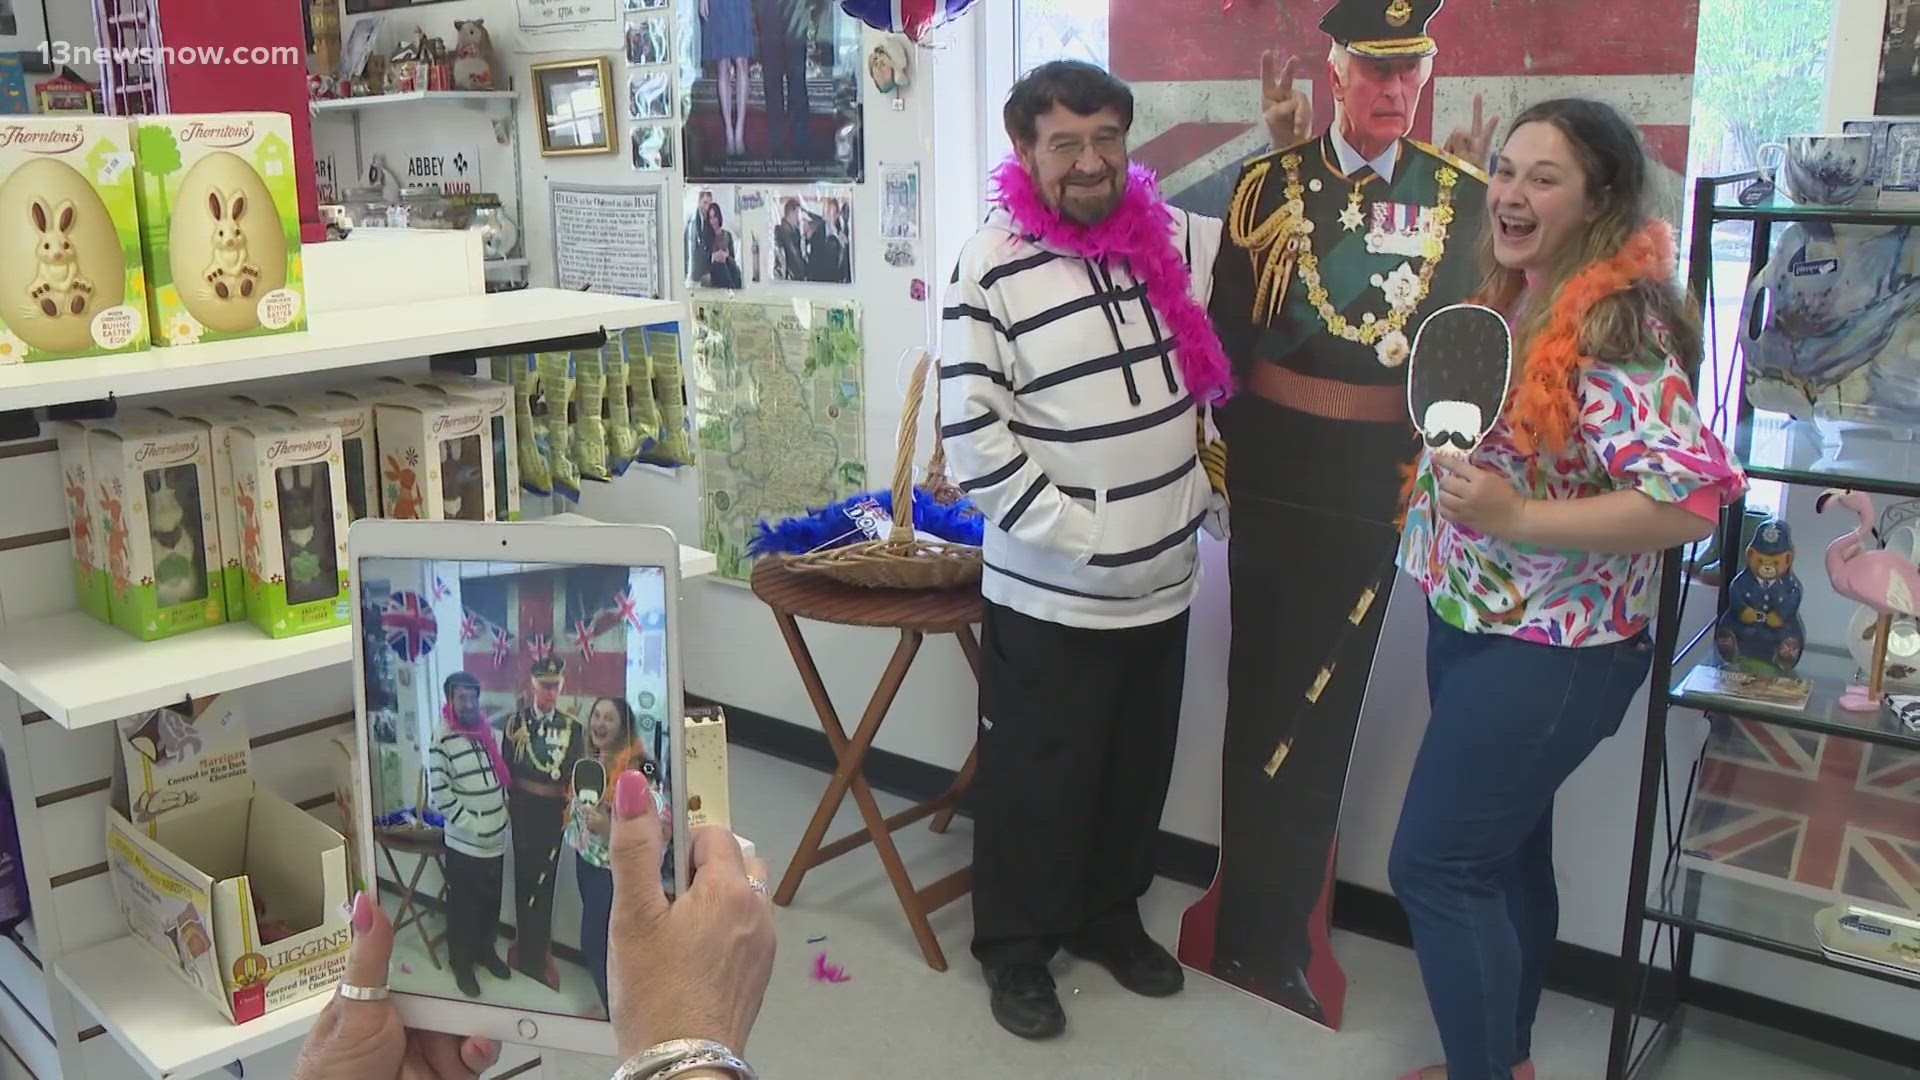 A local British shop brought the festivity of the coronation of King Charles III to Hampton."Best of British" hosted an open house celebration of its own.